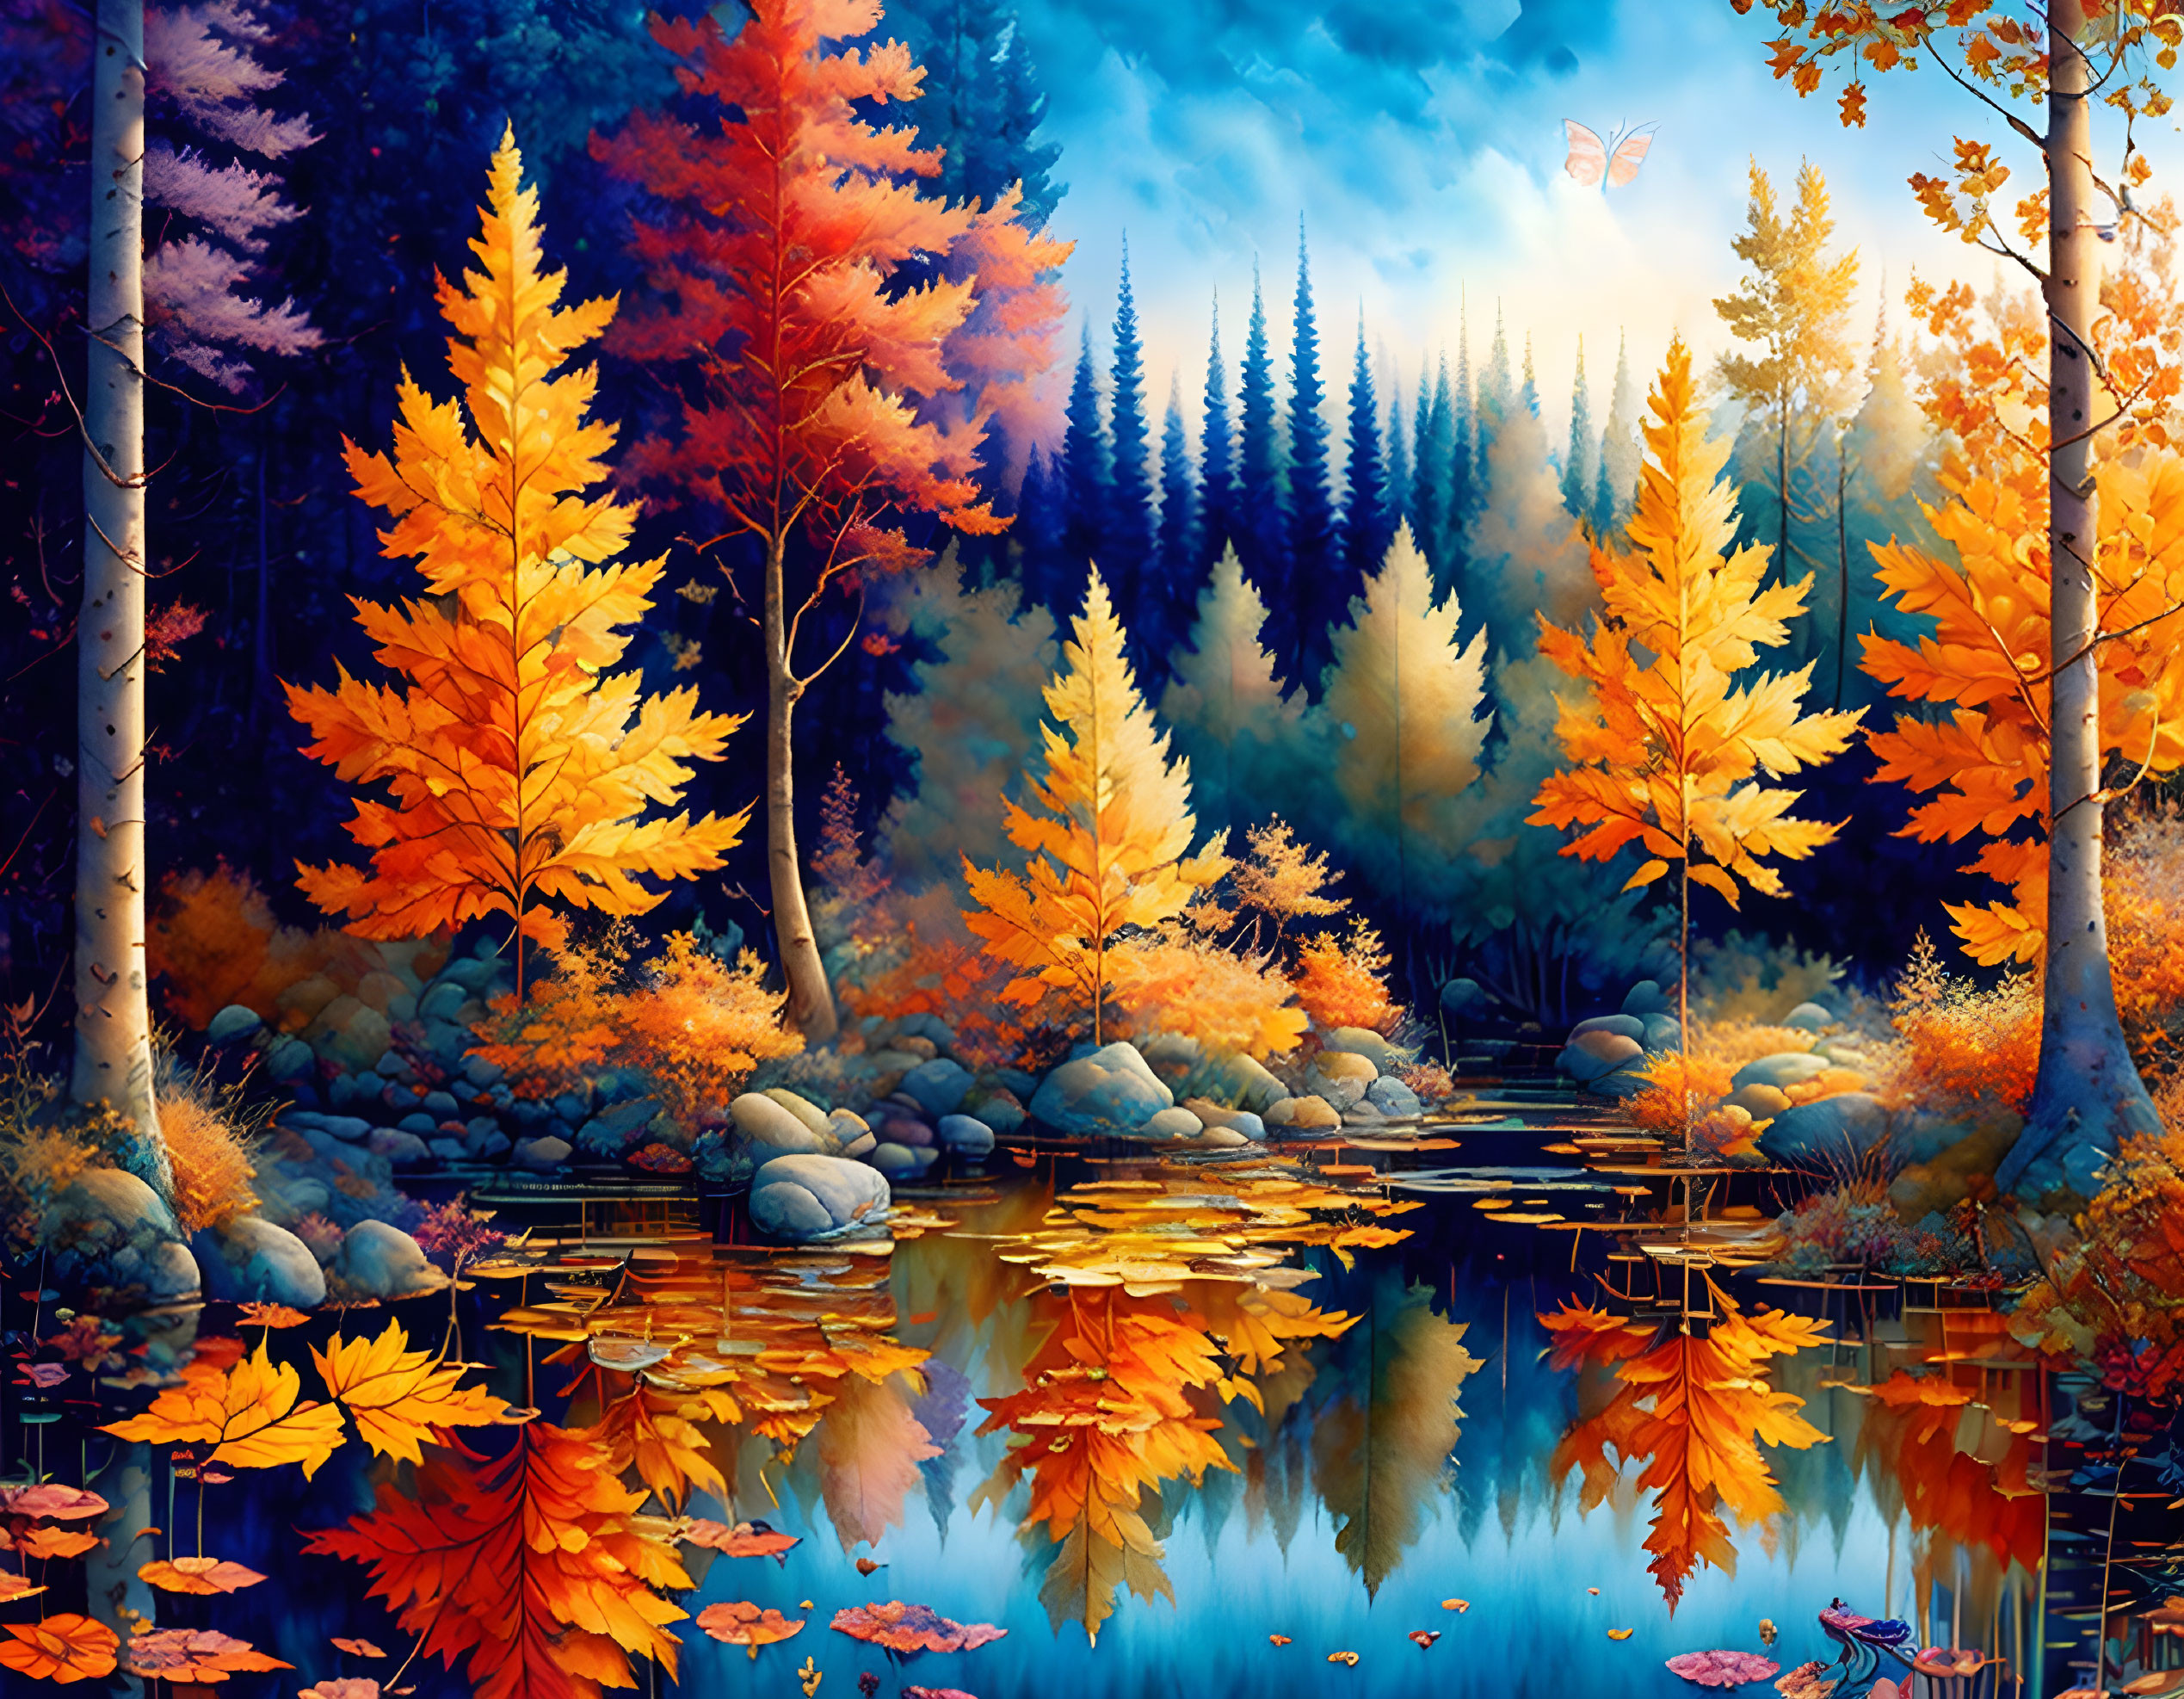 Colorful autumn forest scene with reflective lake and butterflies